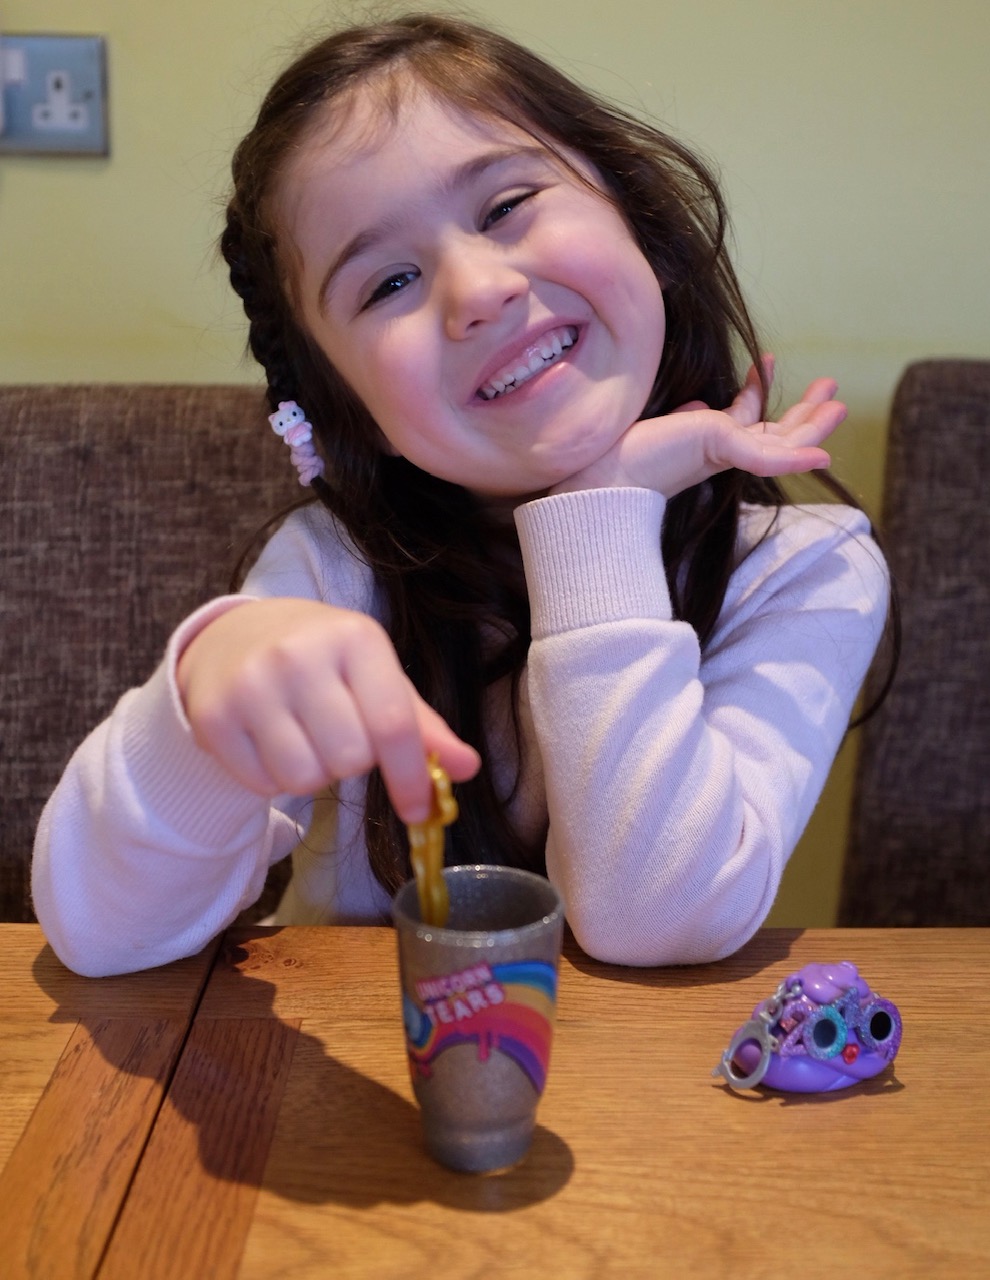 girl mixing up poopsie slime from the Pooey Puitton